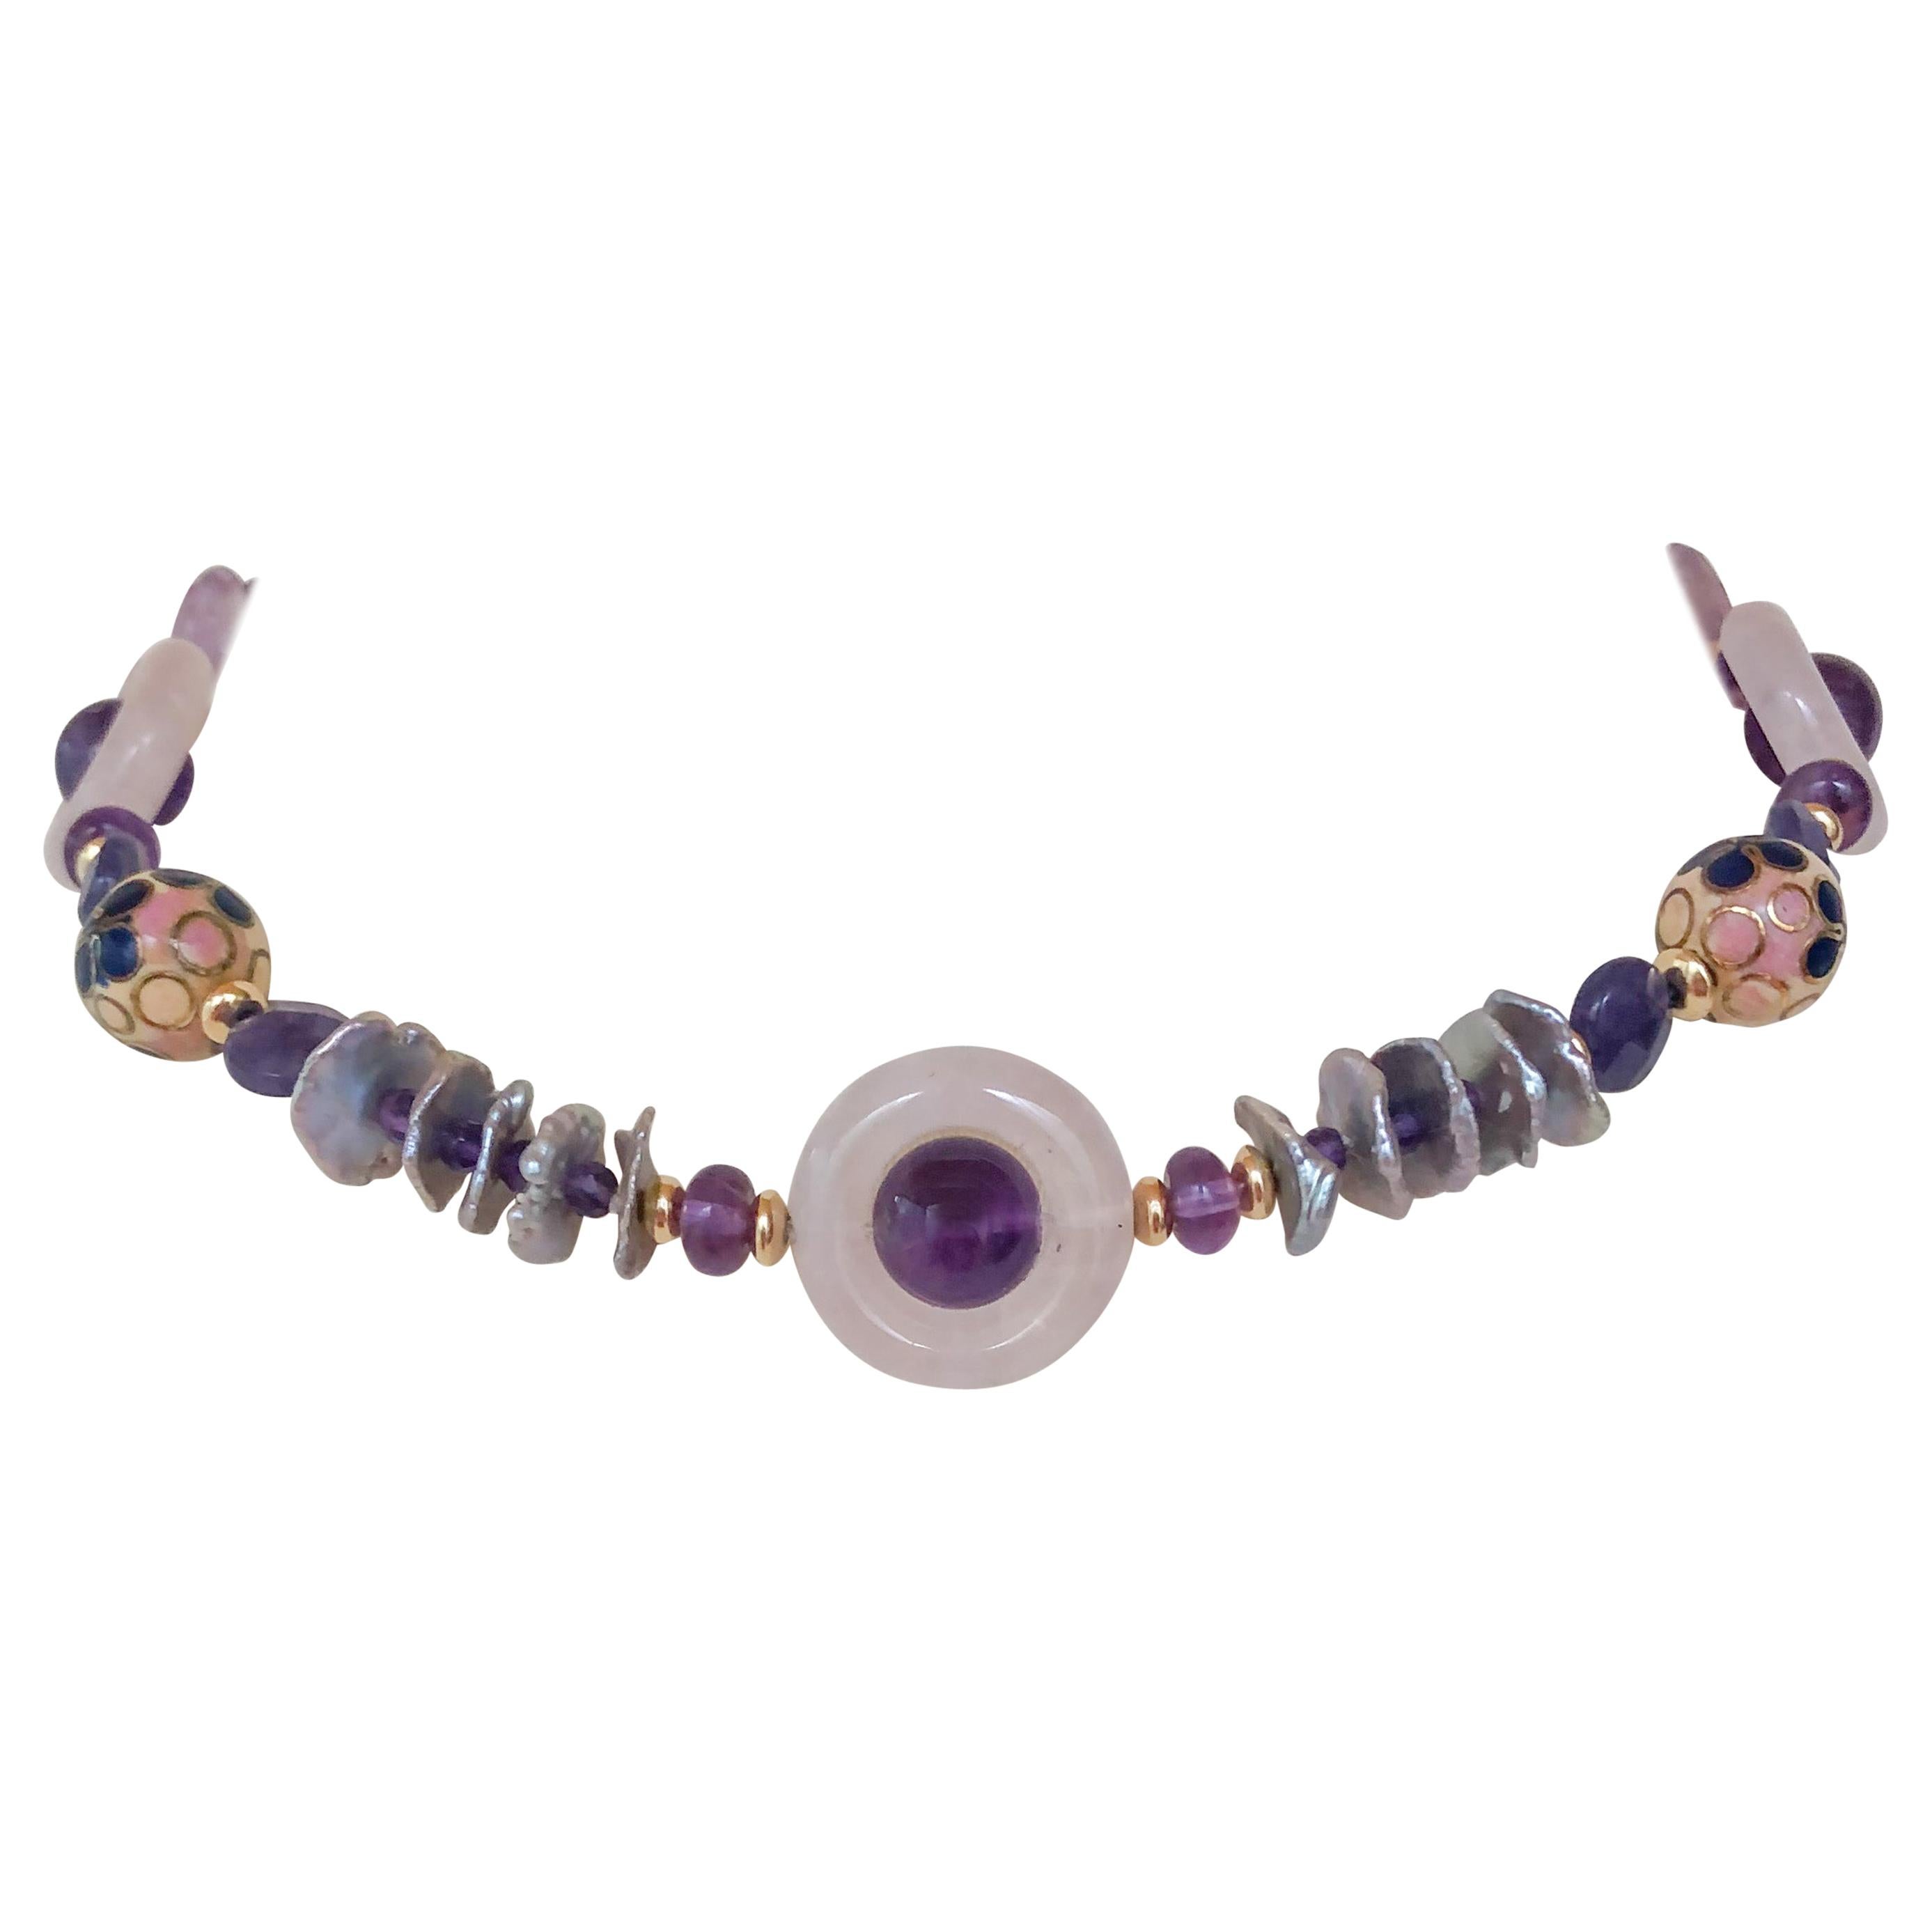 Marina J. Amethyst and Rose Quartz Necklace with Enamel Beads Pearls and Vermeil